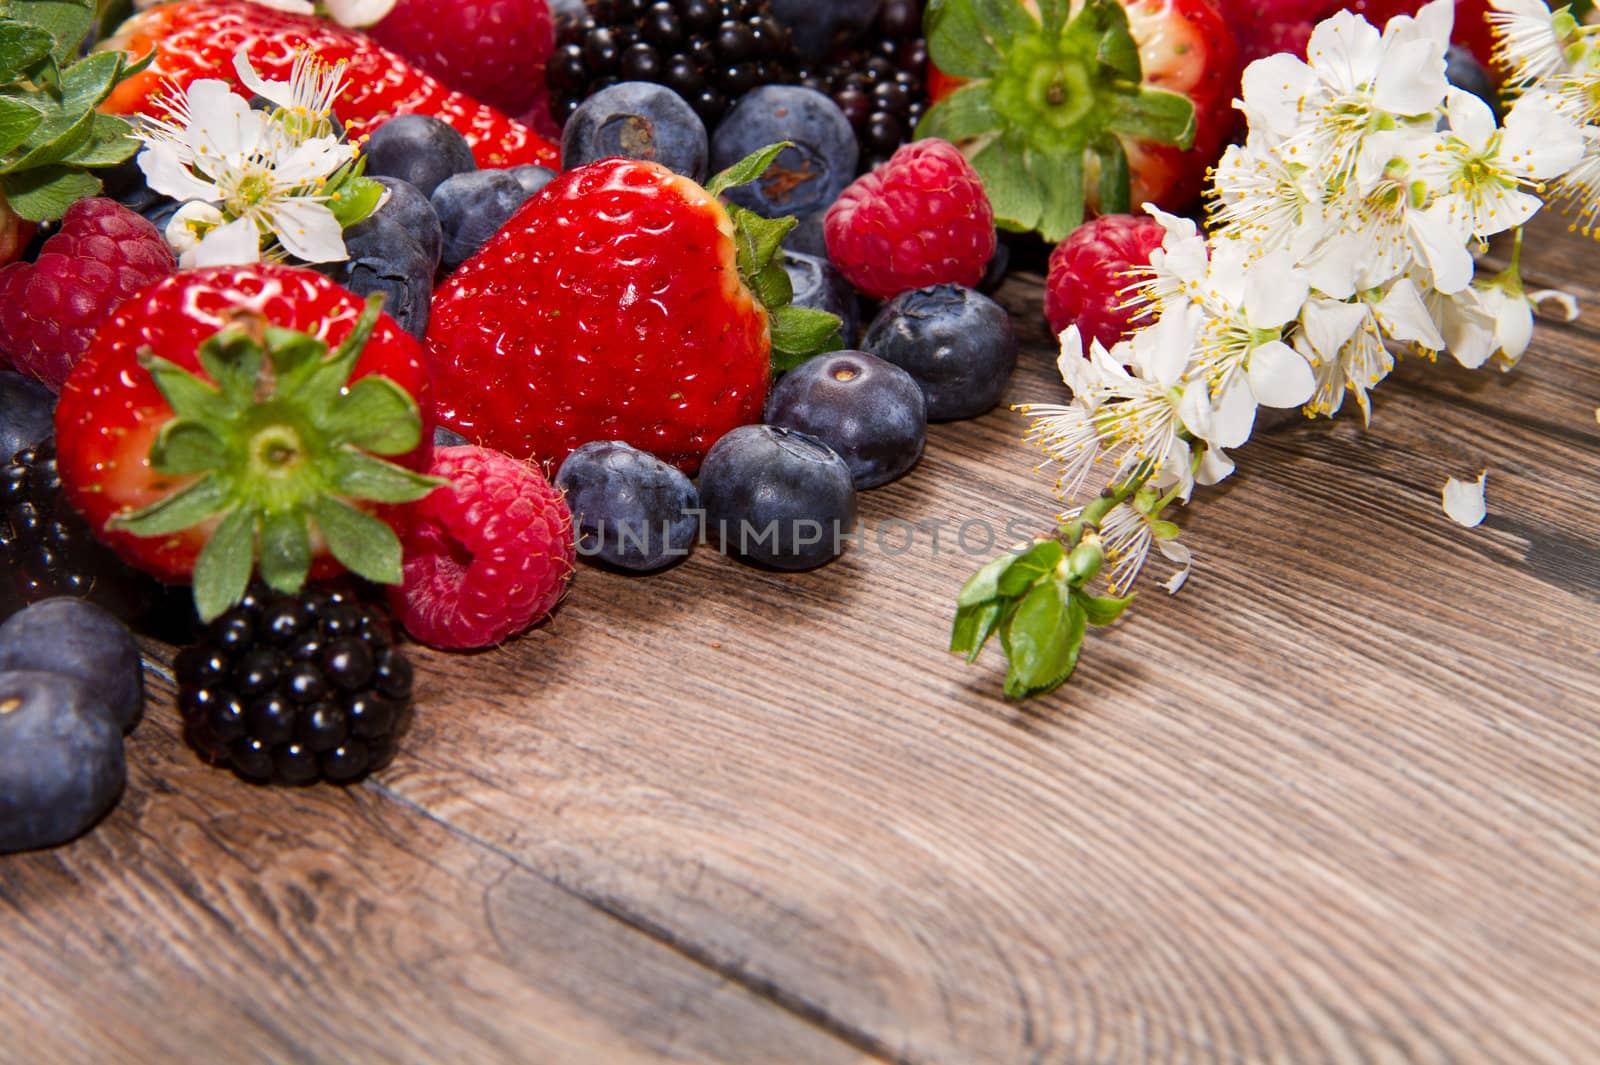 Berries and white flower on Wooden Background